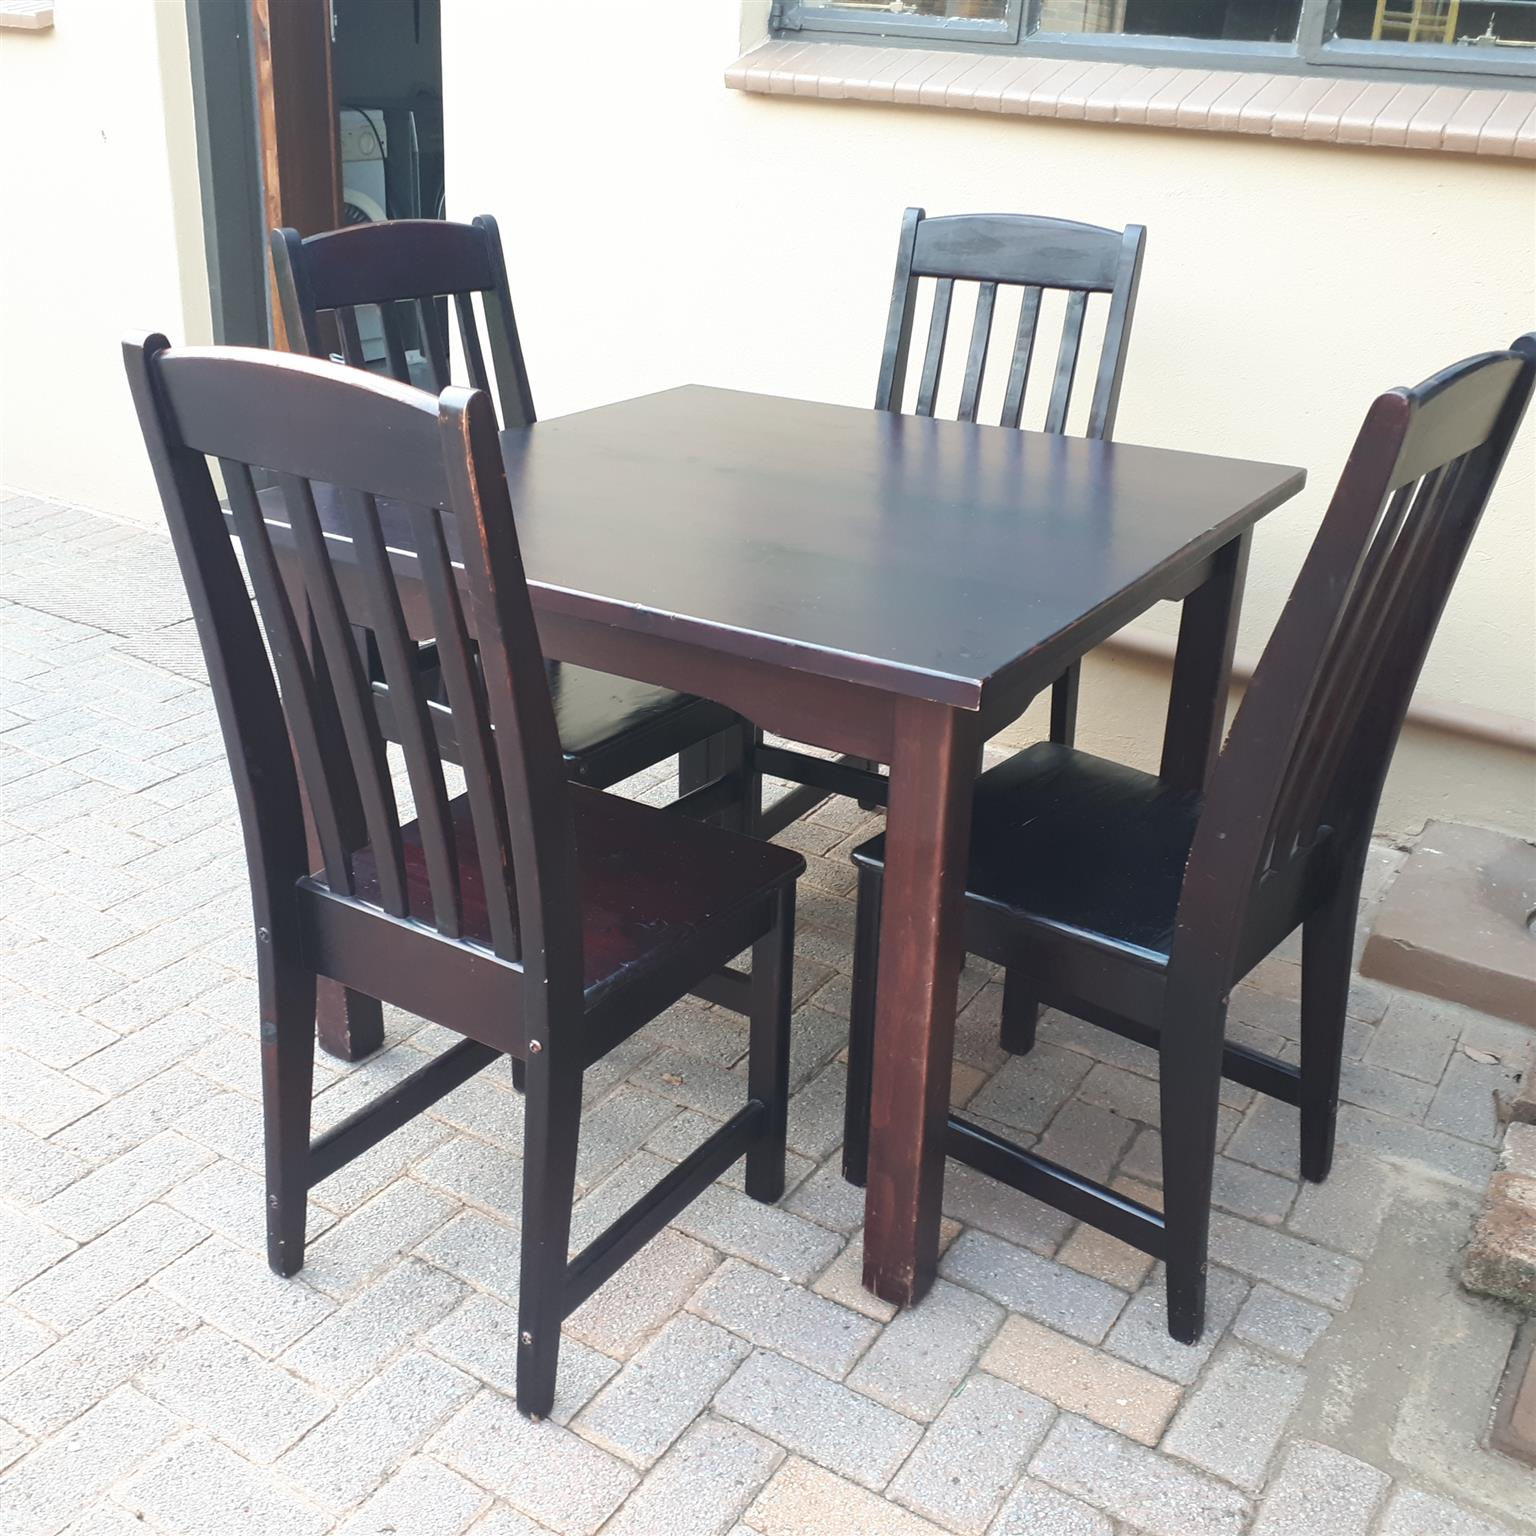 Dining Table 4 Chairs Junk Mail in dimensions 1536 X 1536